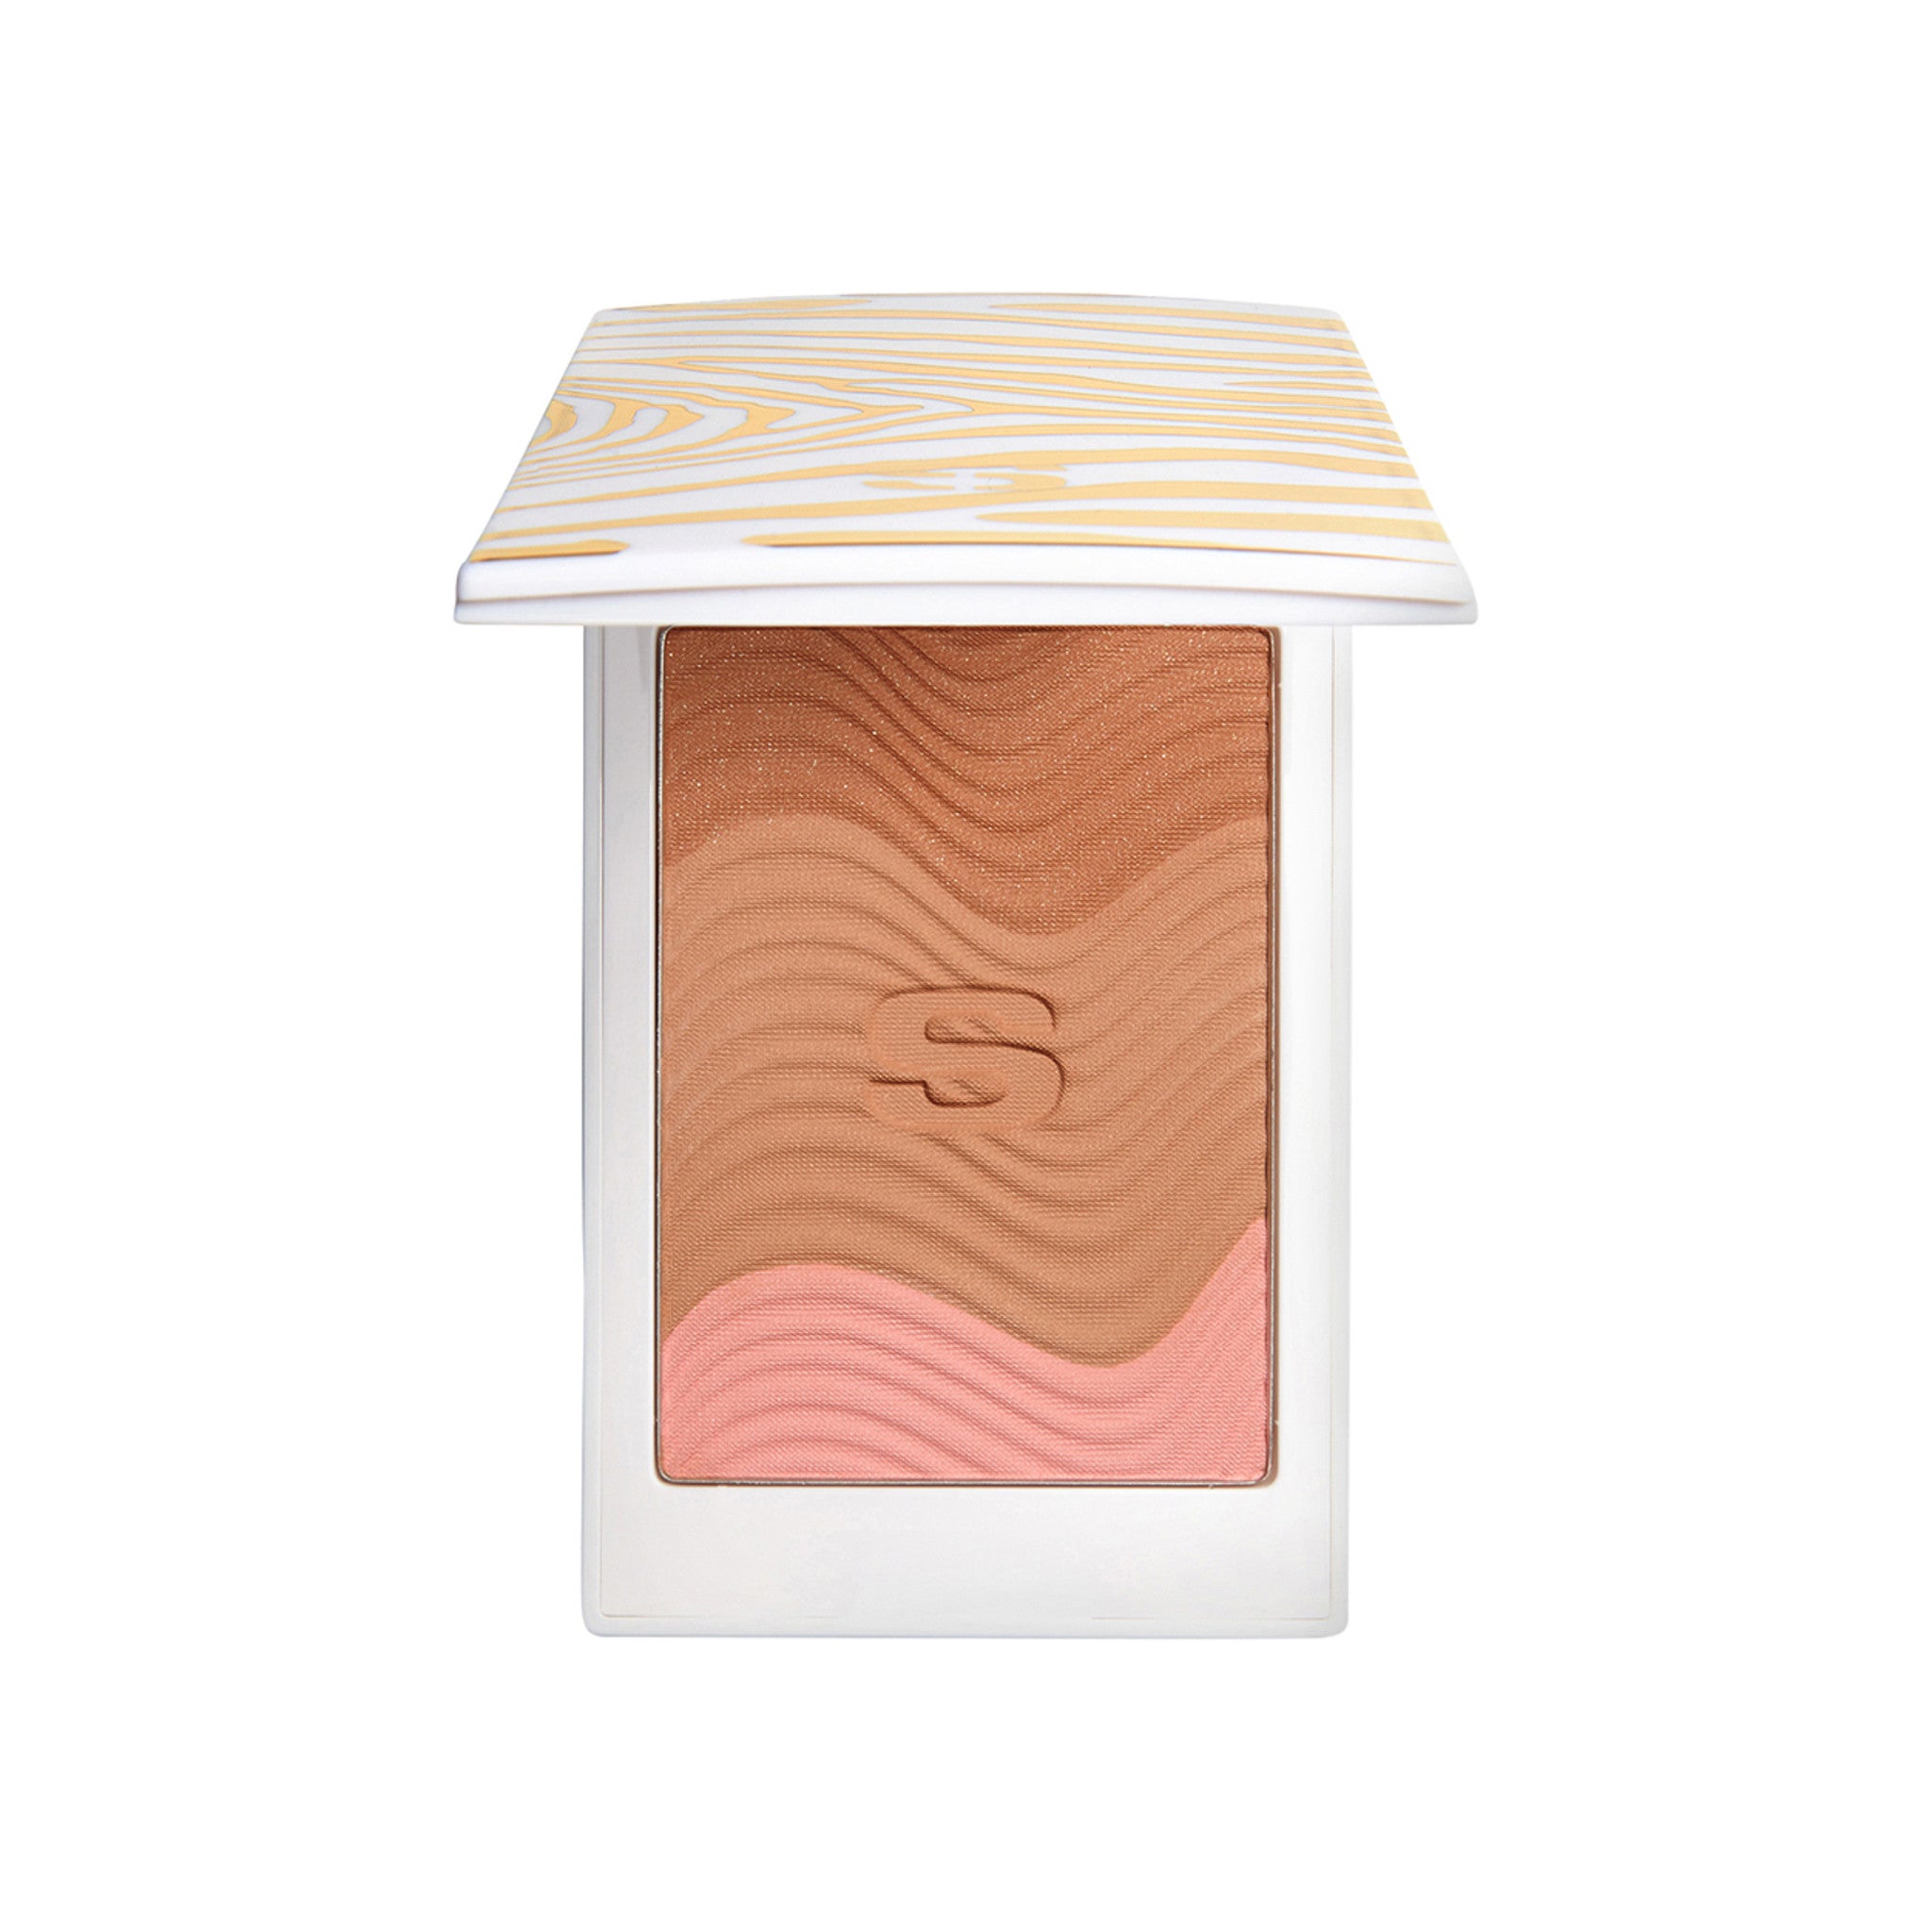 Sisley-Paris Phyto-Touche Sun Glow Powder Color/Shade variant: Trio Miel Cannelle main image. This product is in the color orange